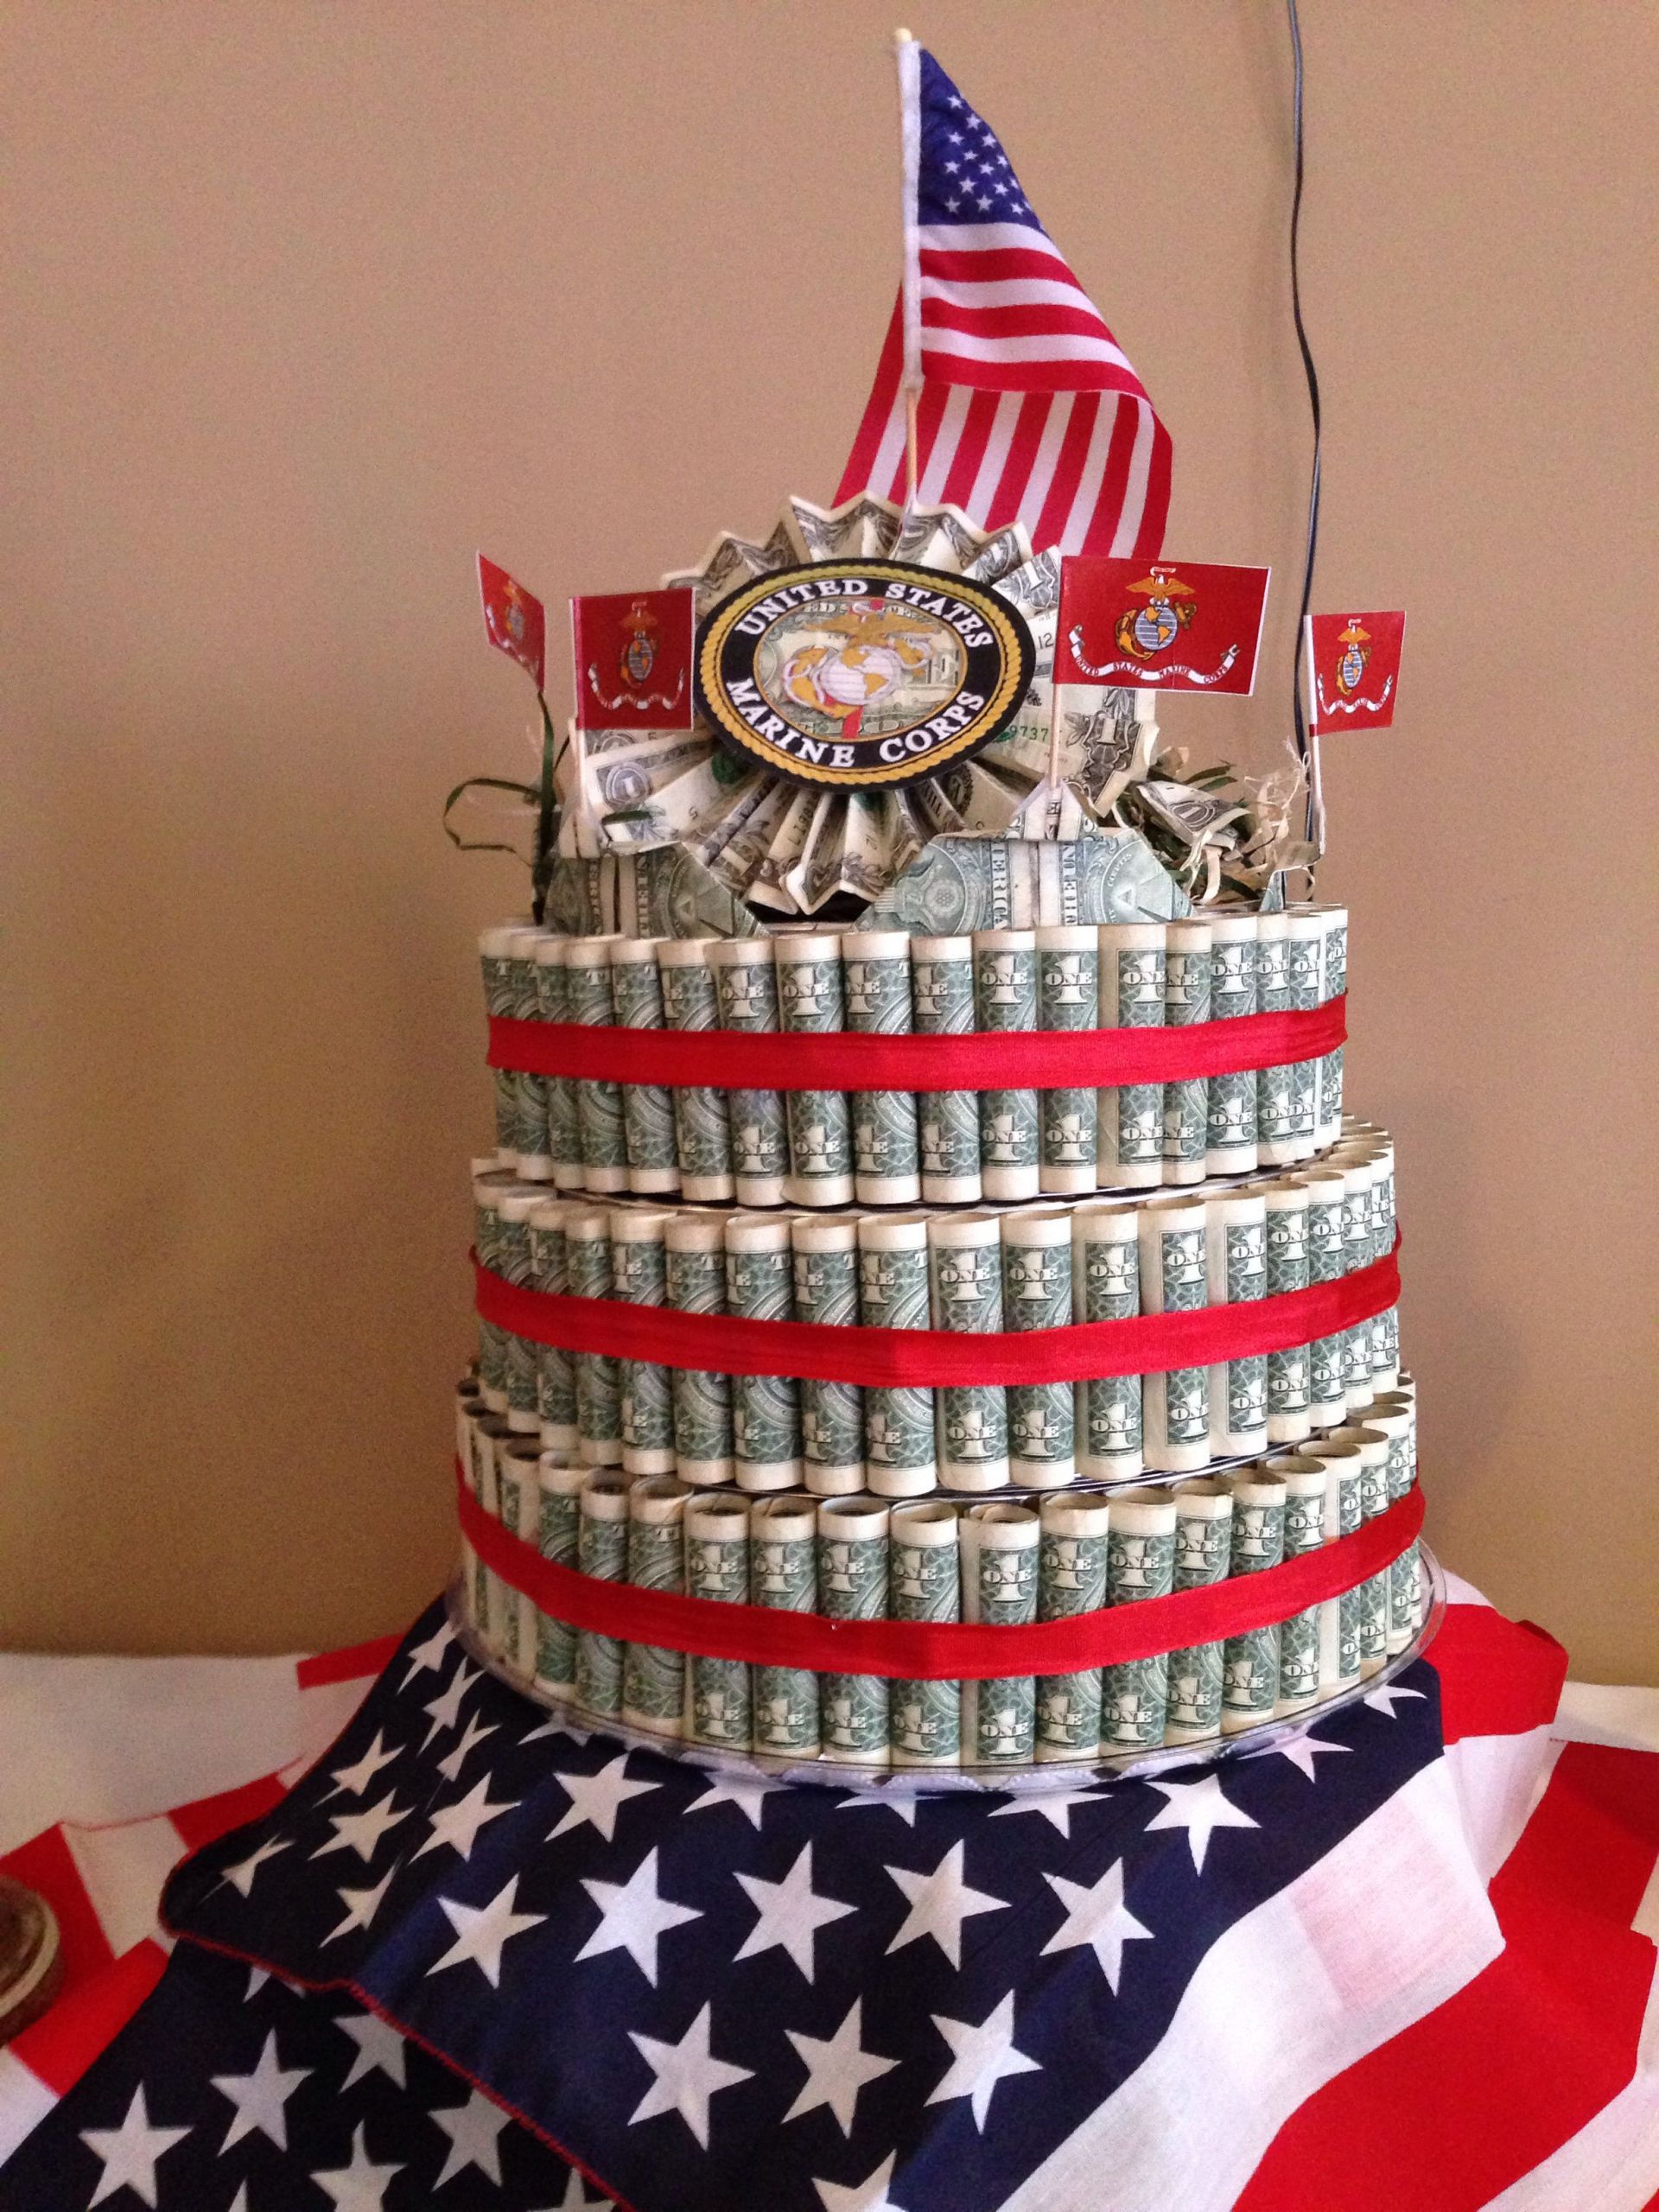 Graduation Gift Ideas For Army Boot Camp
 Marine Graduation Boot Camp Cake